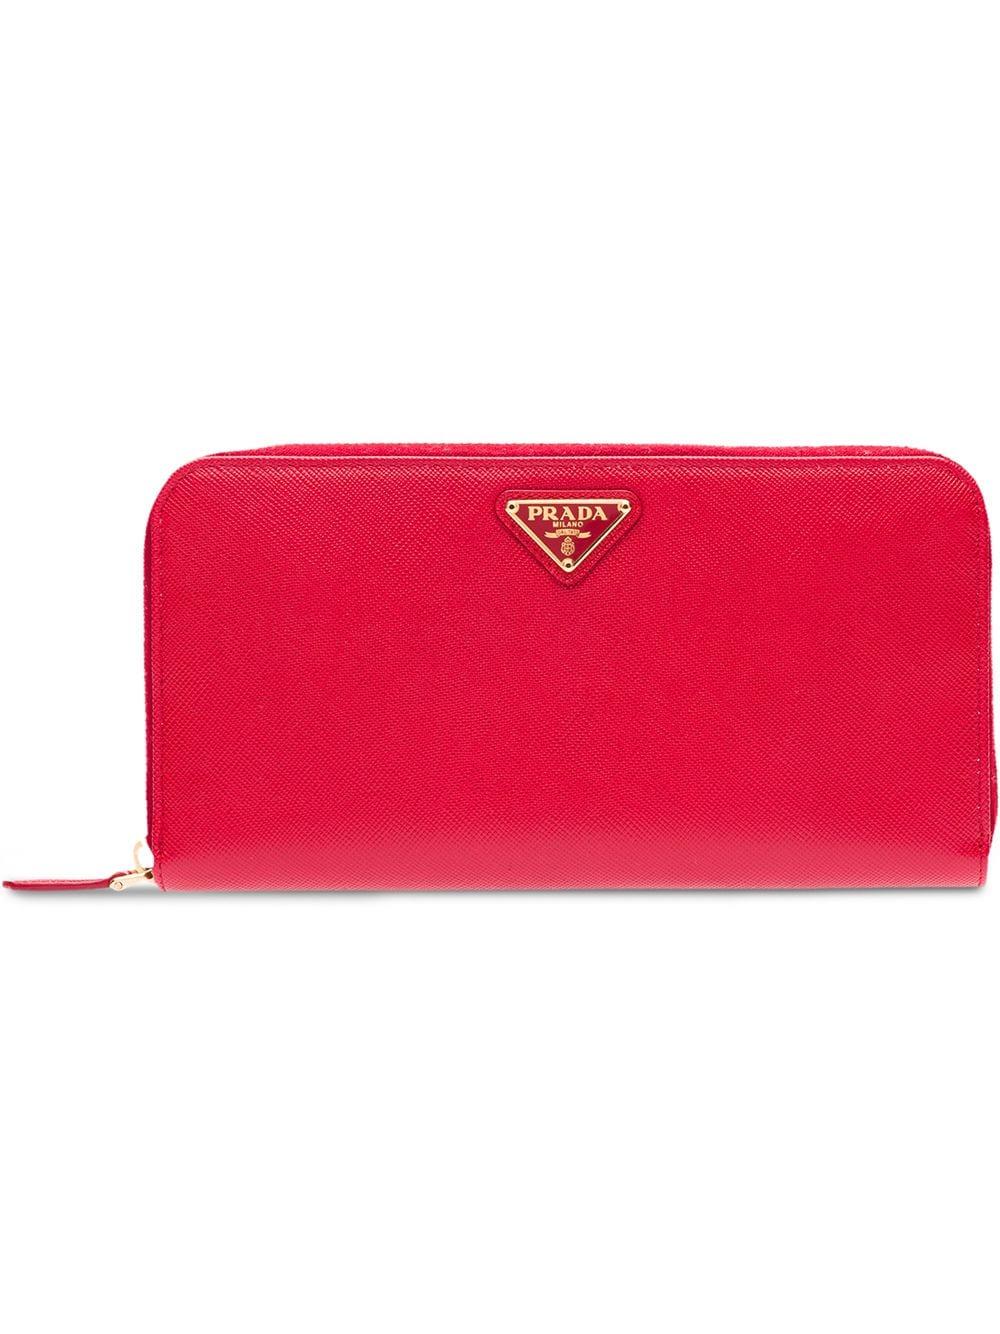 Prada Large Saffiano Leather Wallet in Red | Lyst